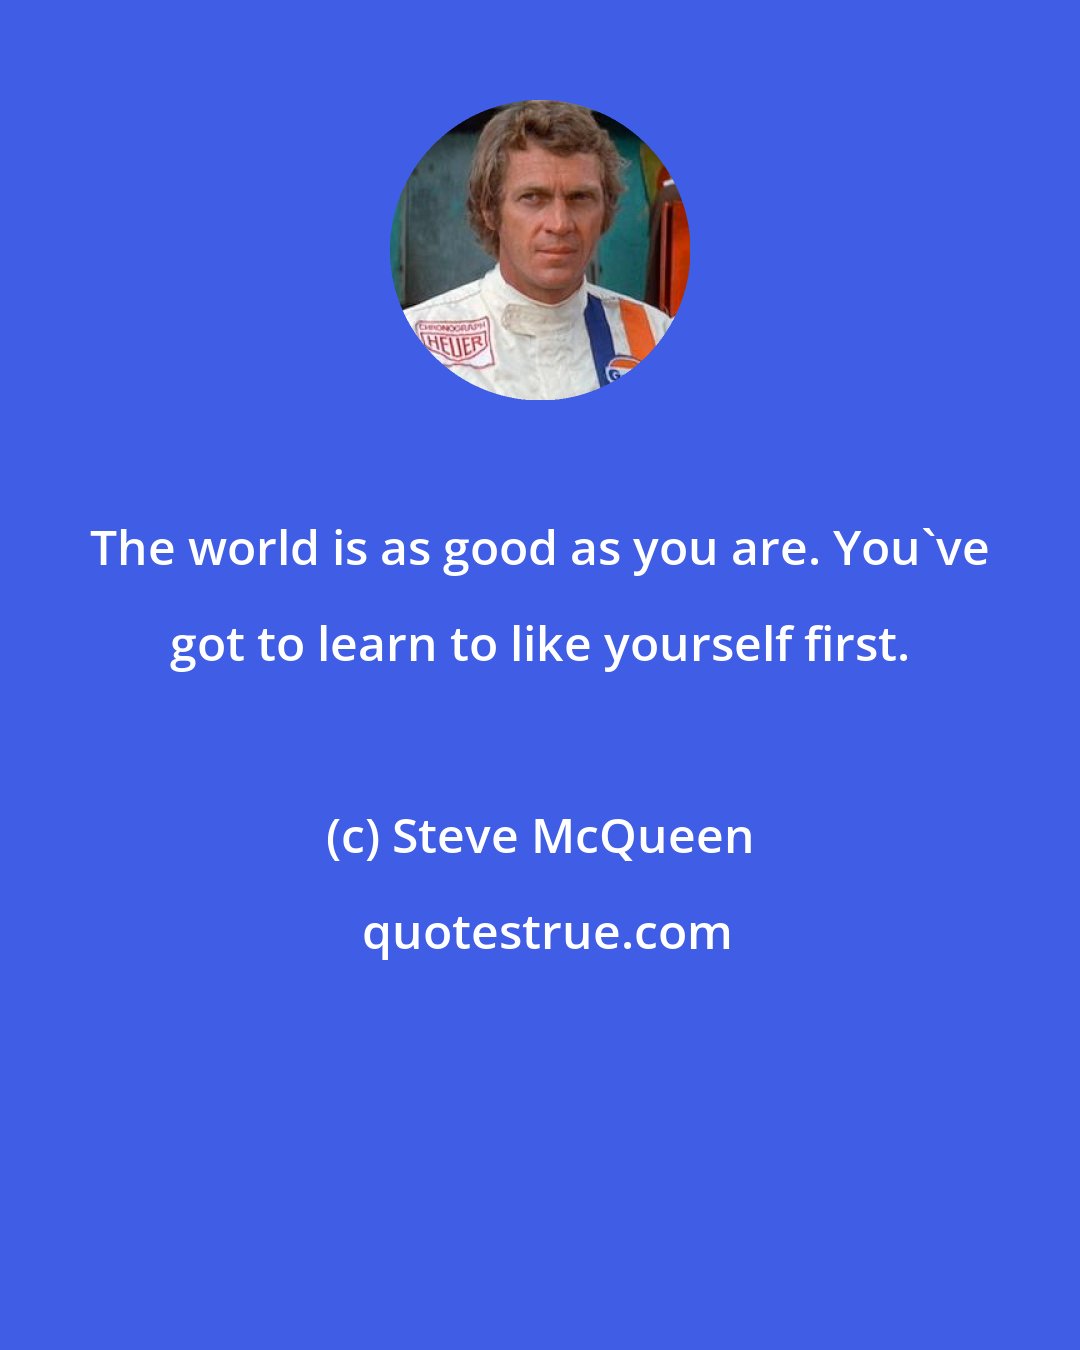 Steve McQueen: The world is as good as you are. You've got to learn to like yourself first.